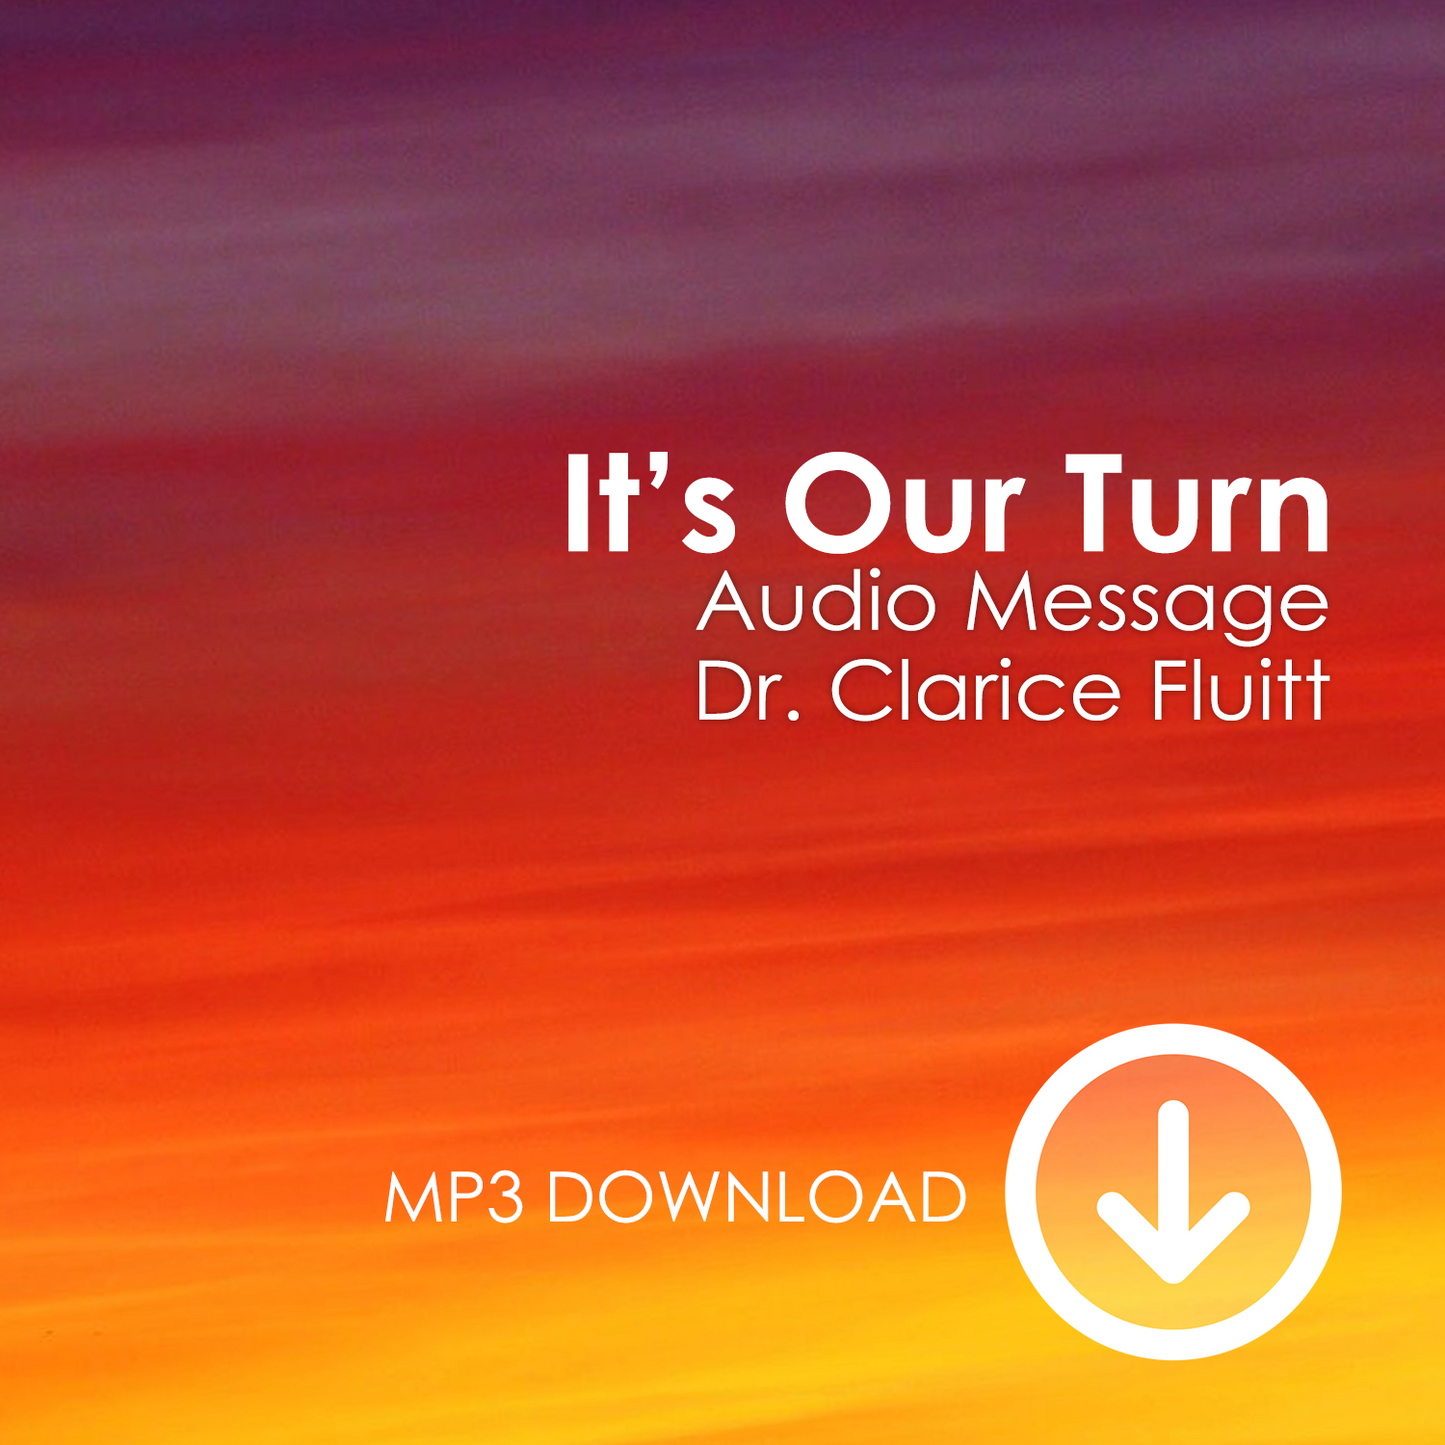 It's Our Turn MP3